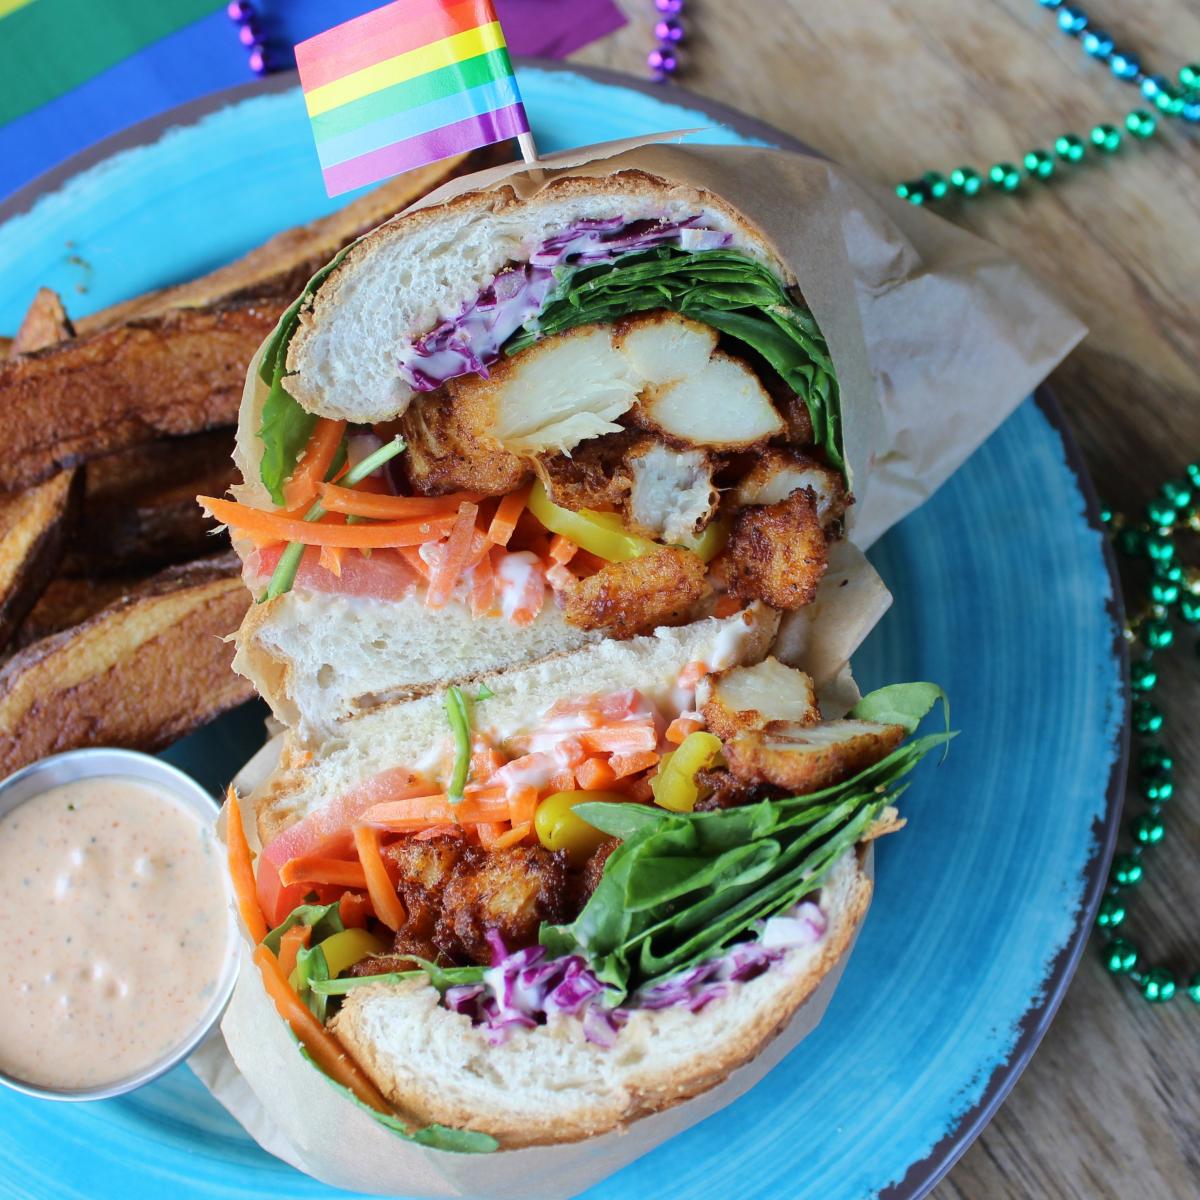 Pride vegan Poboy which is a traditional sandwich from Louisiana - best seller at Krimsey's Cajun Kitchen